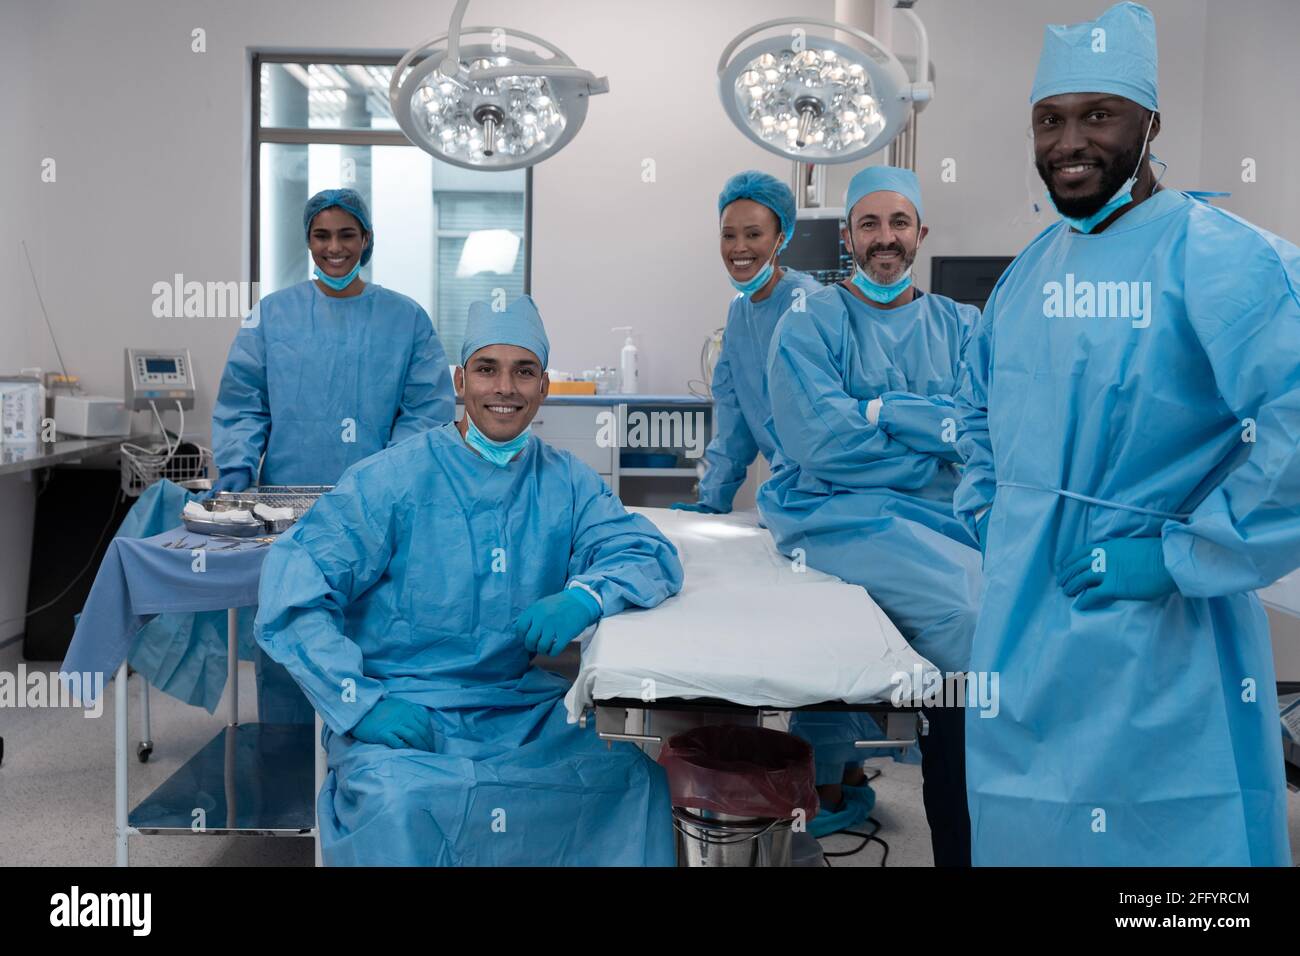 Smiling diverse surgeons with face masks and protective clothing in operating theatre Stock Photo